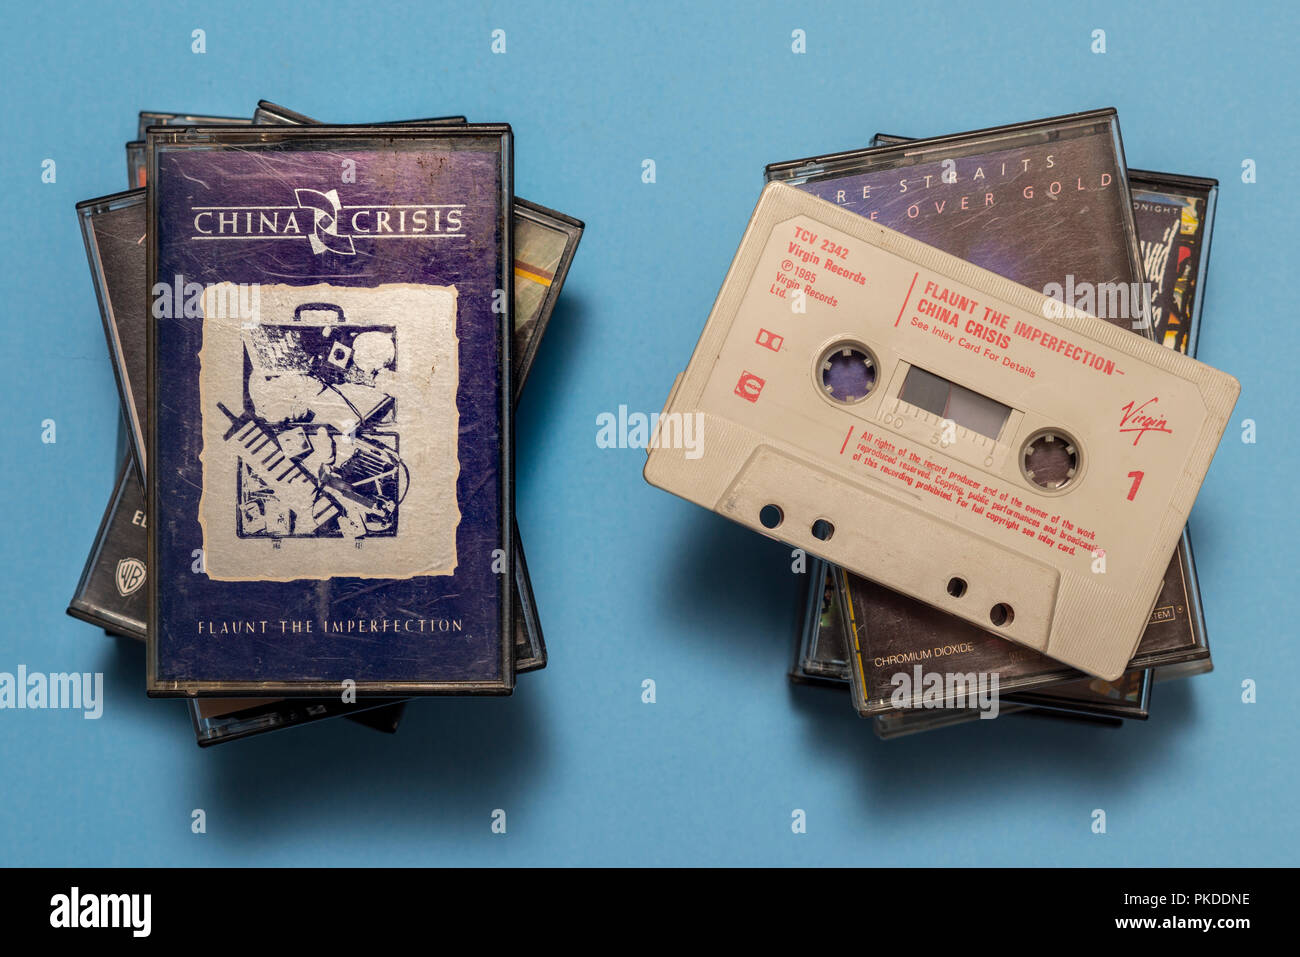 compact audio cassette of China Crisis, Flaunt the Imperfection album with art work. Stock Photo